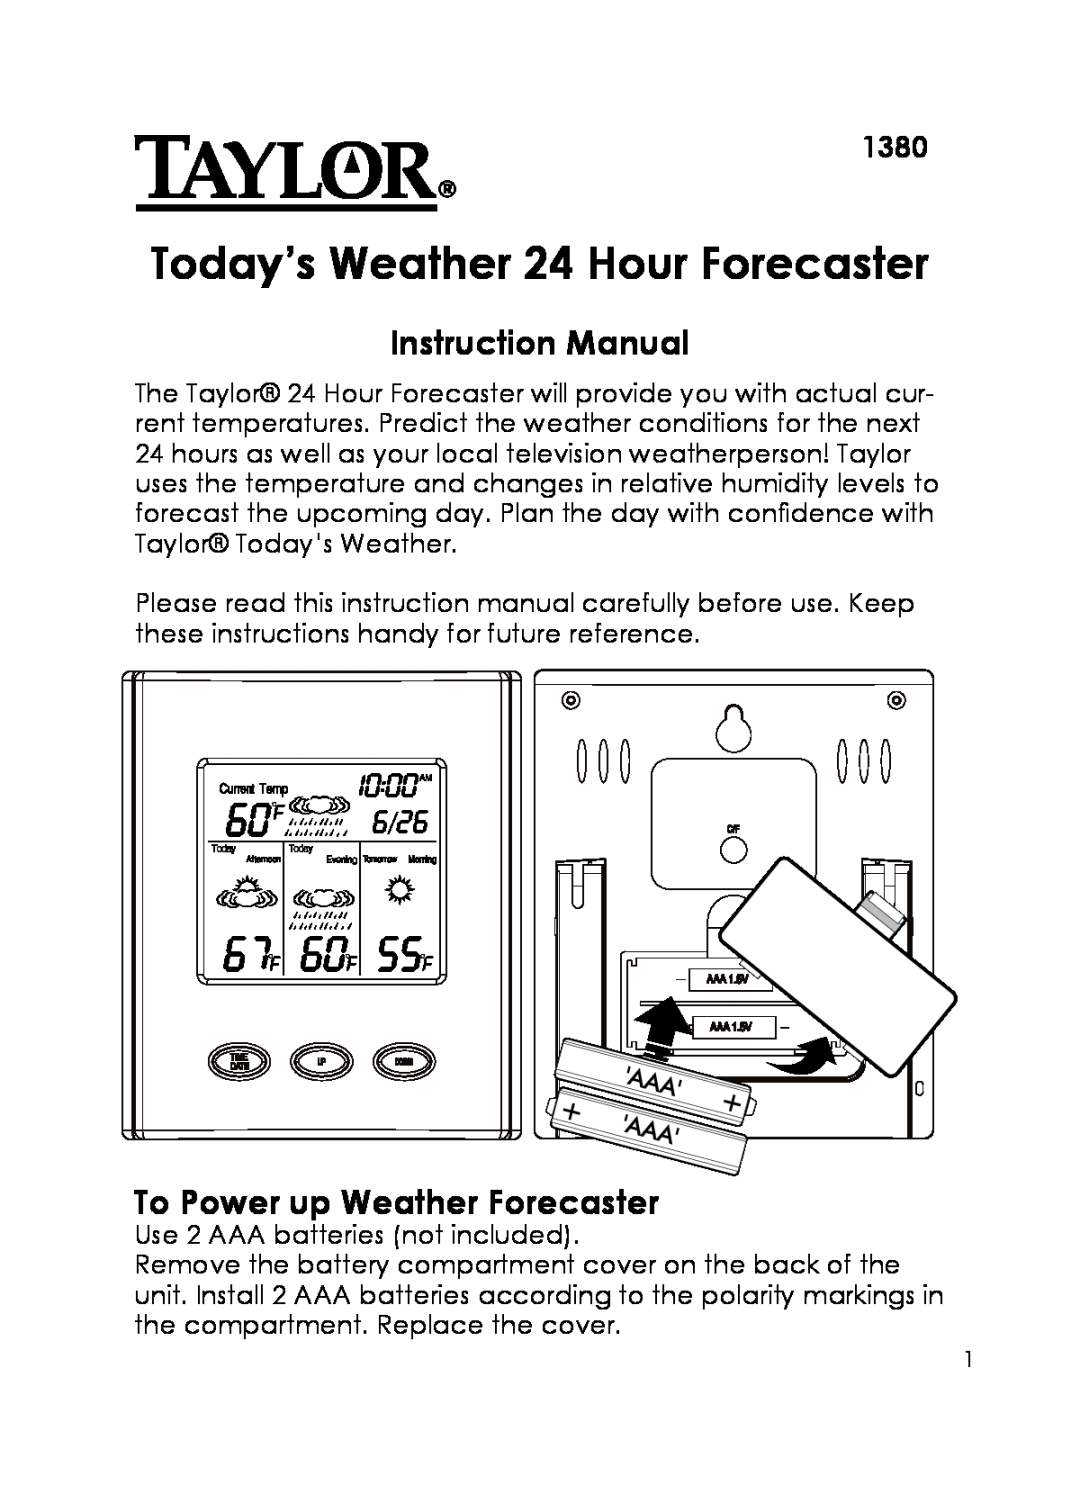 Taylor 1380 instruction manual To Power up Weather Forecaster, Today’s Weather 24 Hour Forecaster 